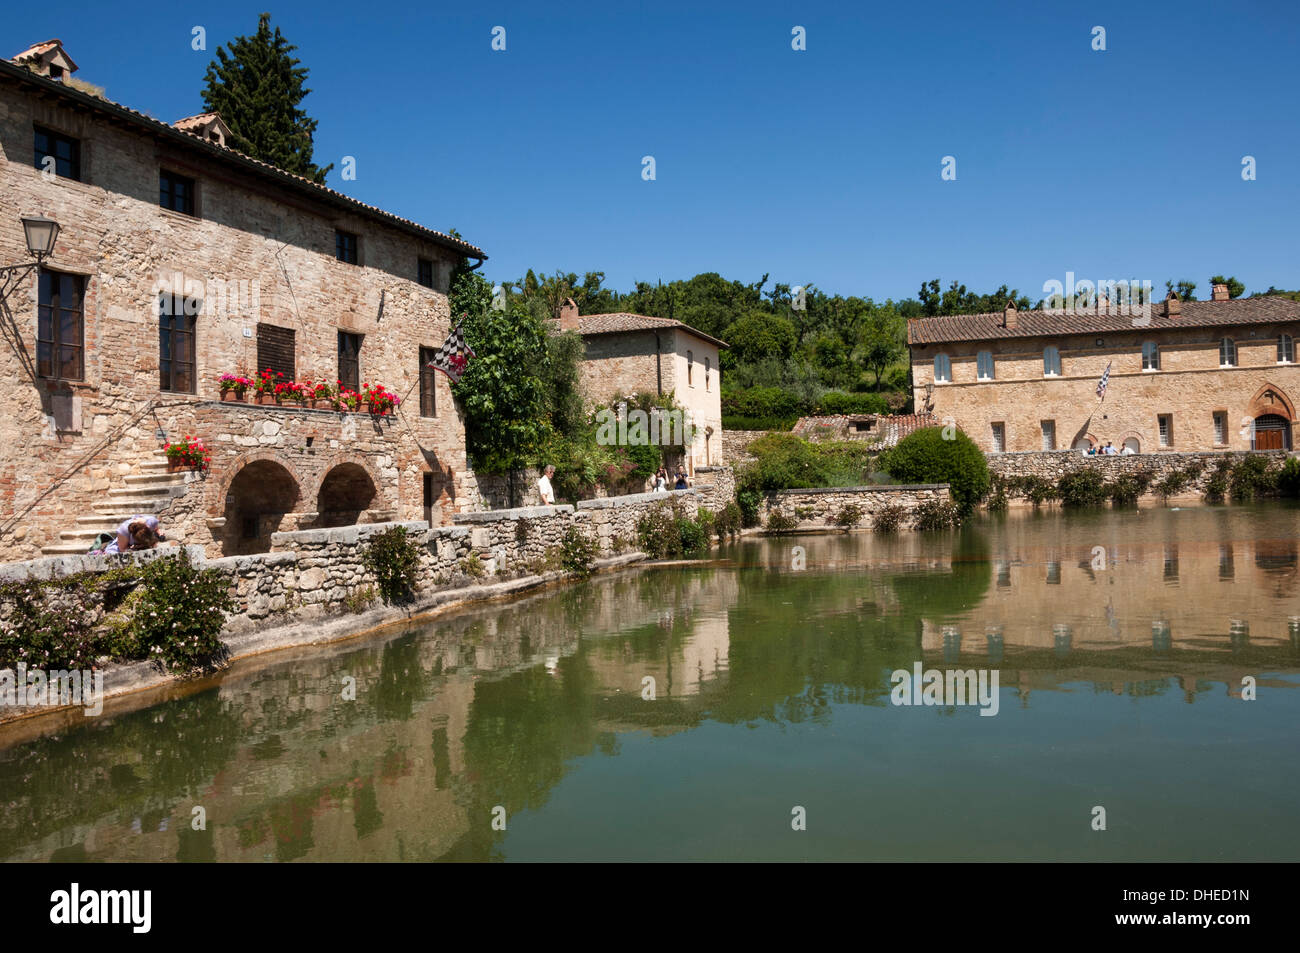 Thermal spring in the village of Bagno Vignoni, now unfit for bathing, Val d'Orcia, Tuscany, Italy, Europe Stock Photo